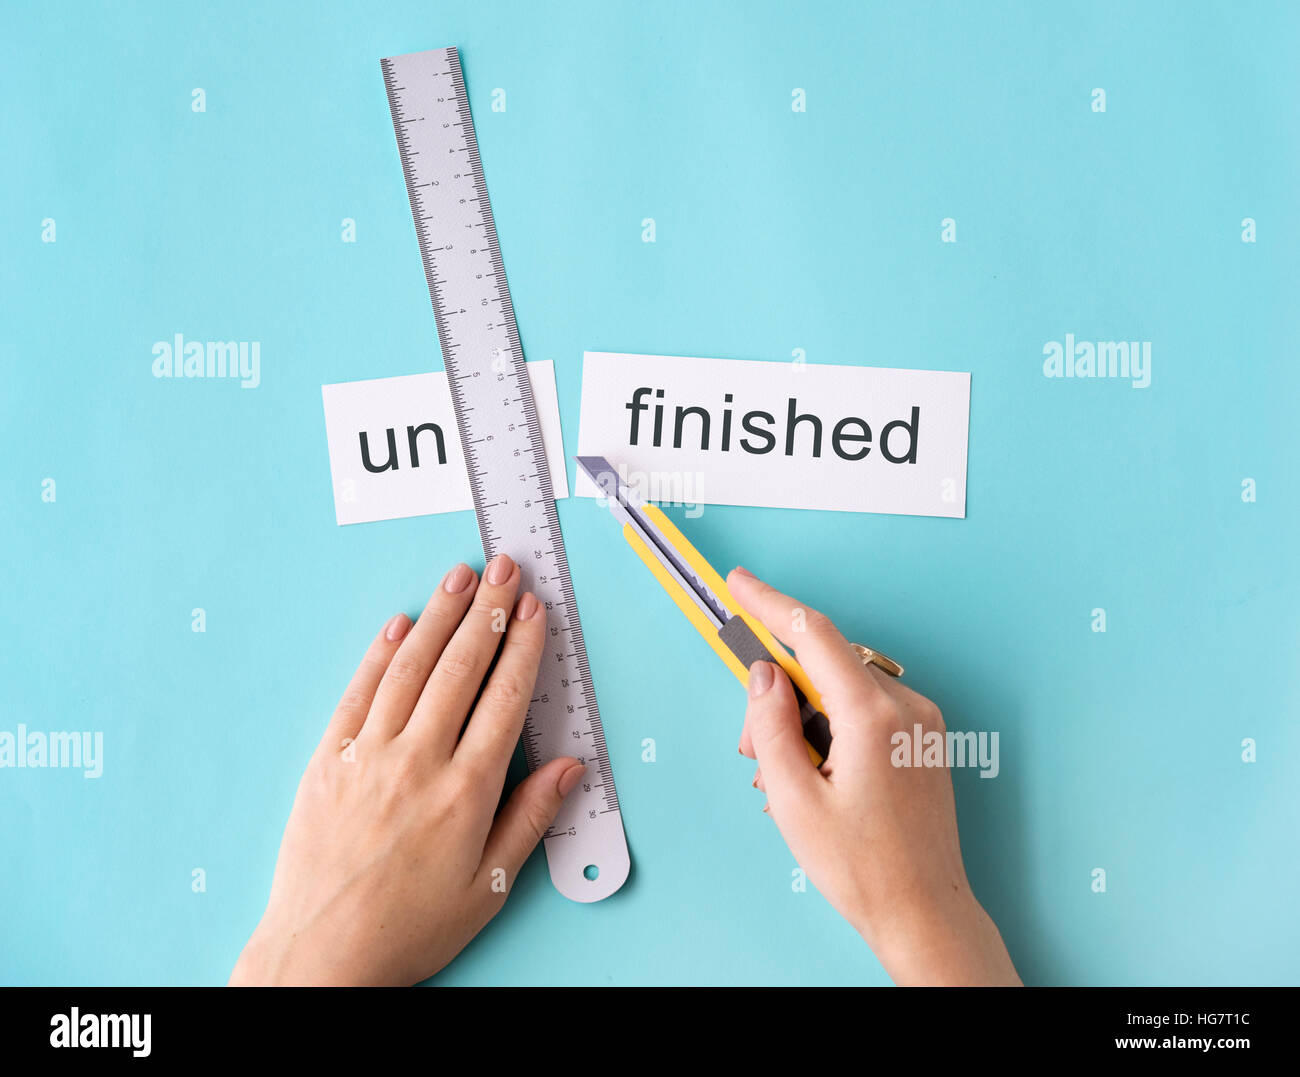 Unfinished Incomplete Hand Cut Word Split Concept Stock Photo